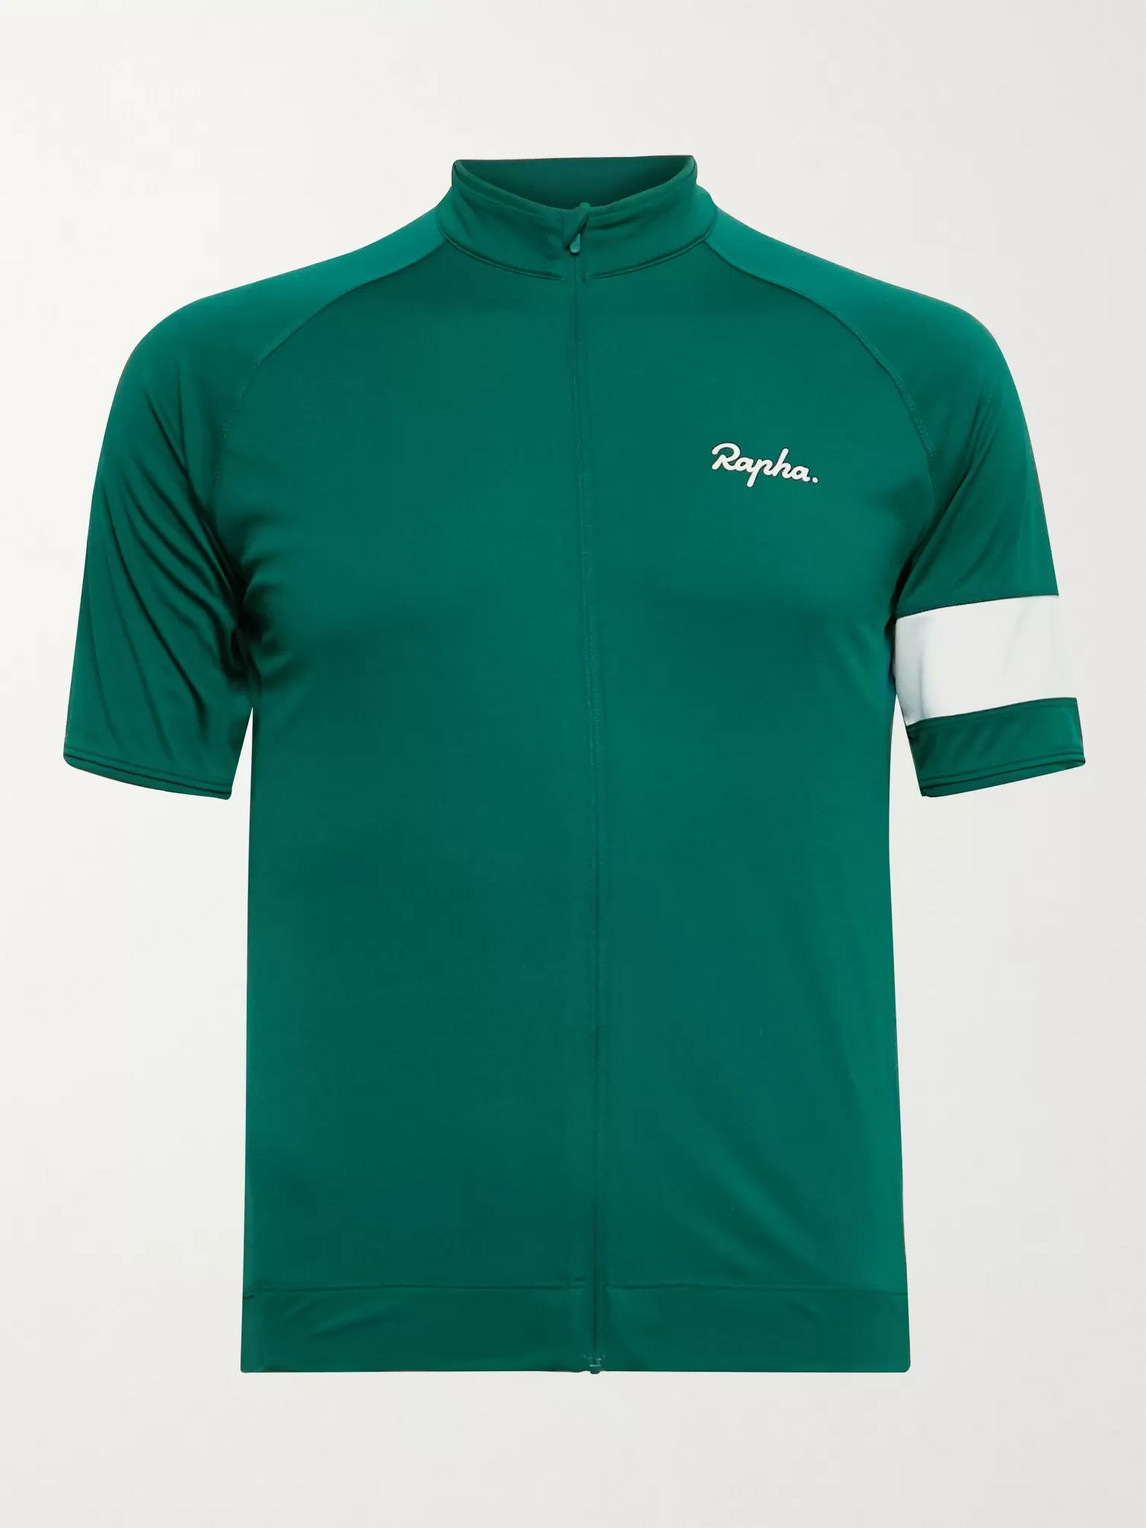 Rapha Core Cycling Jersey In Green